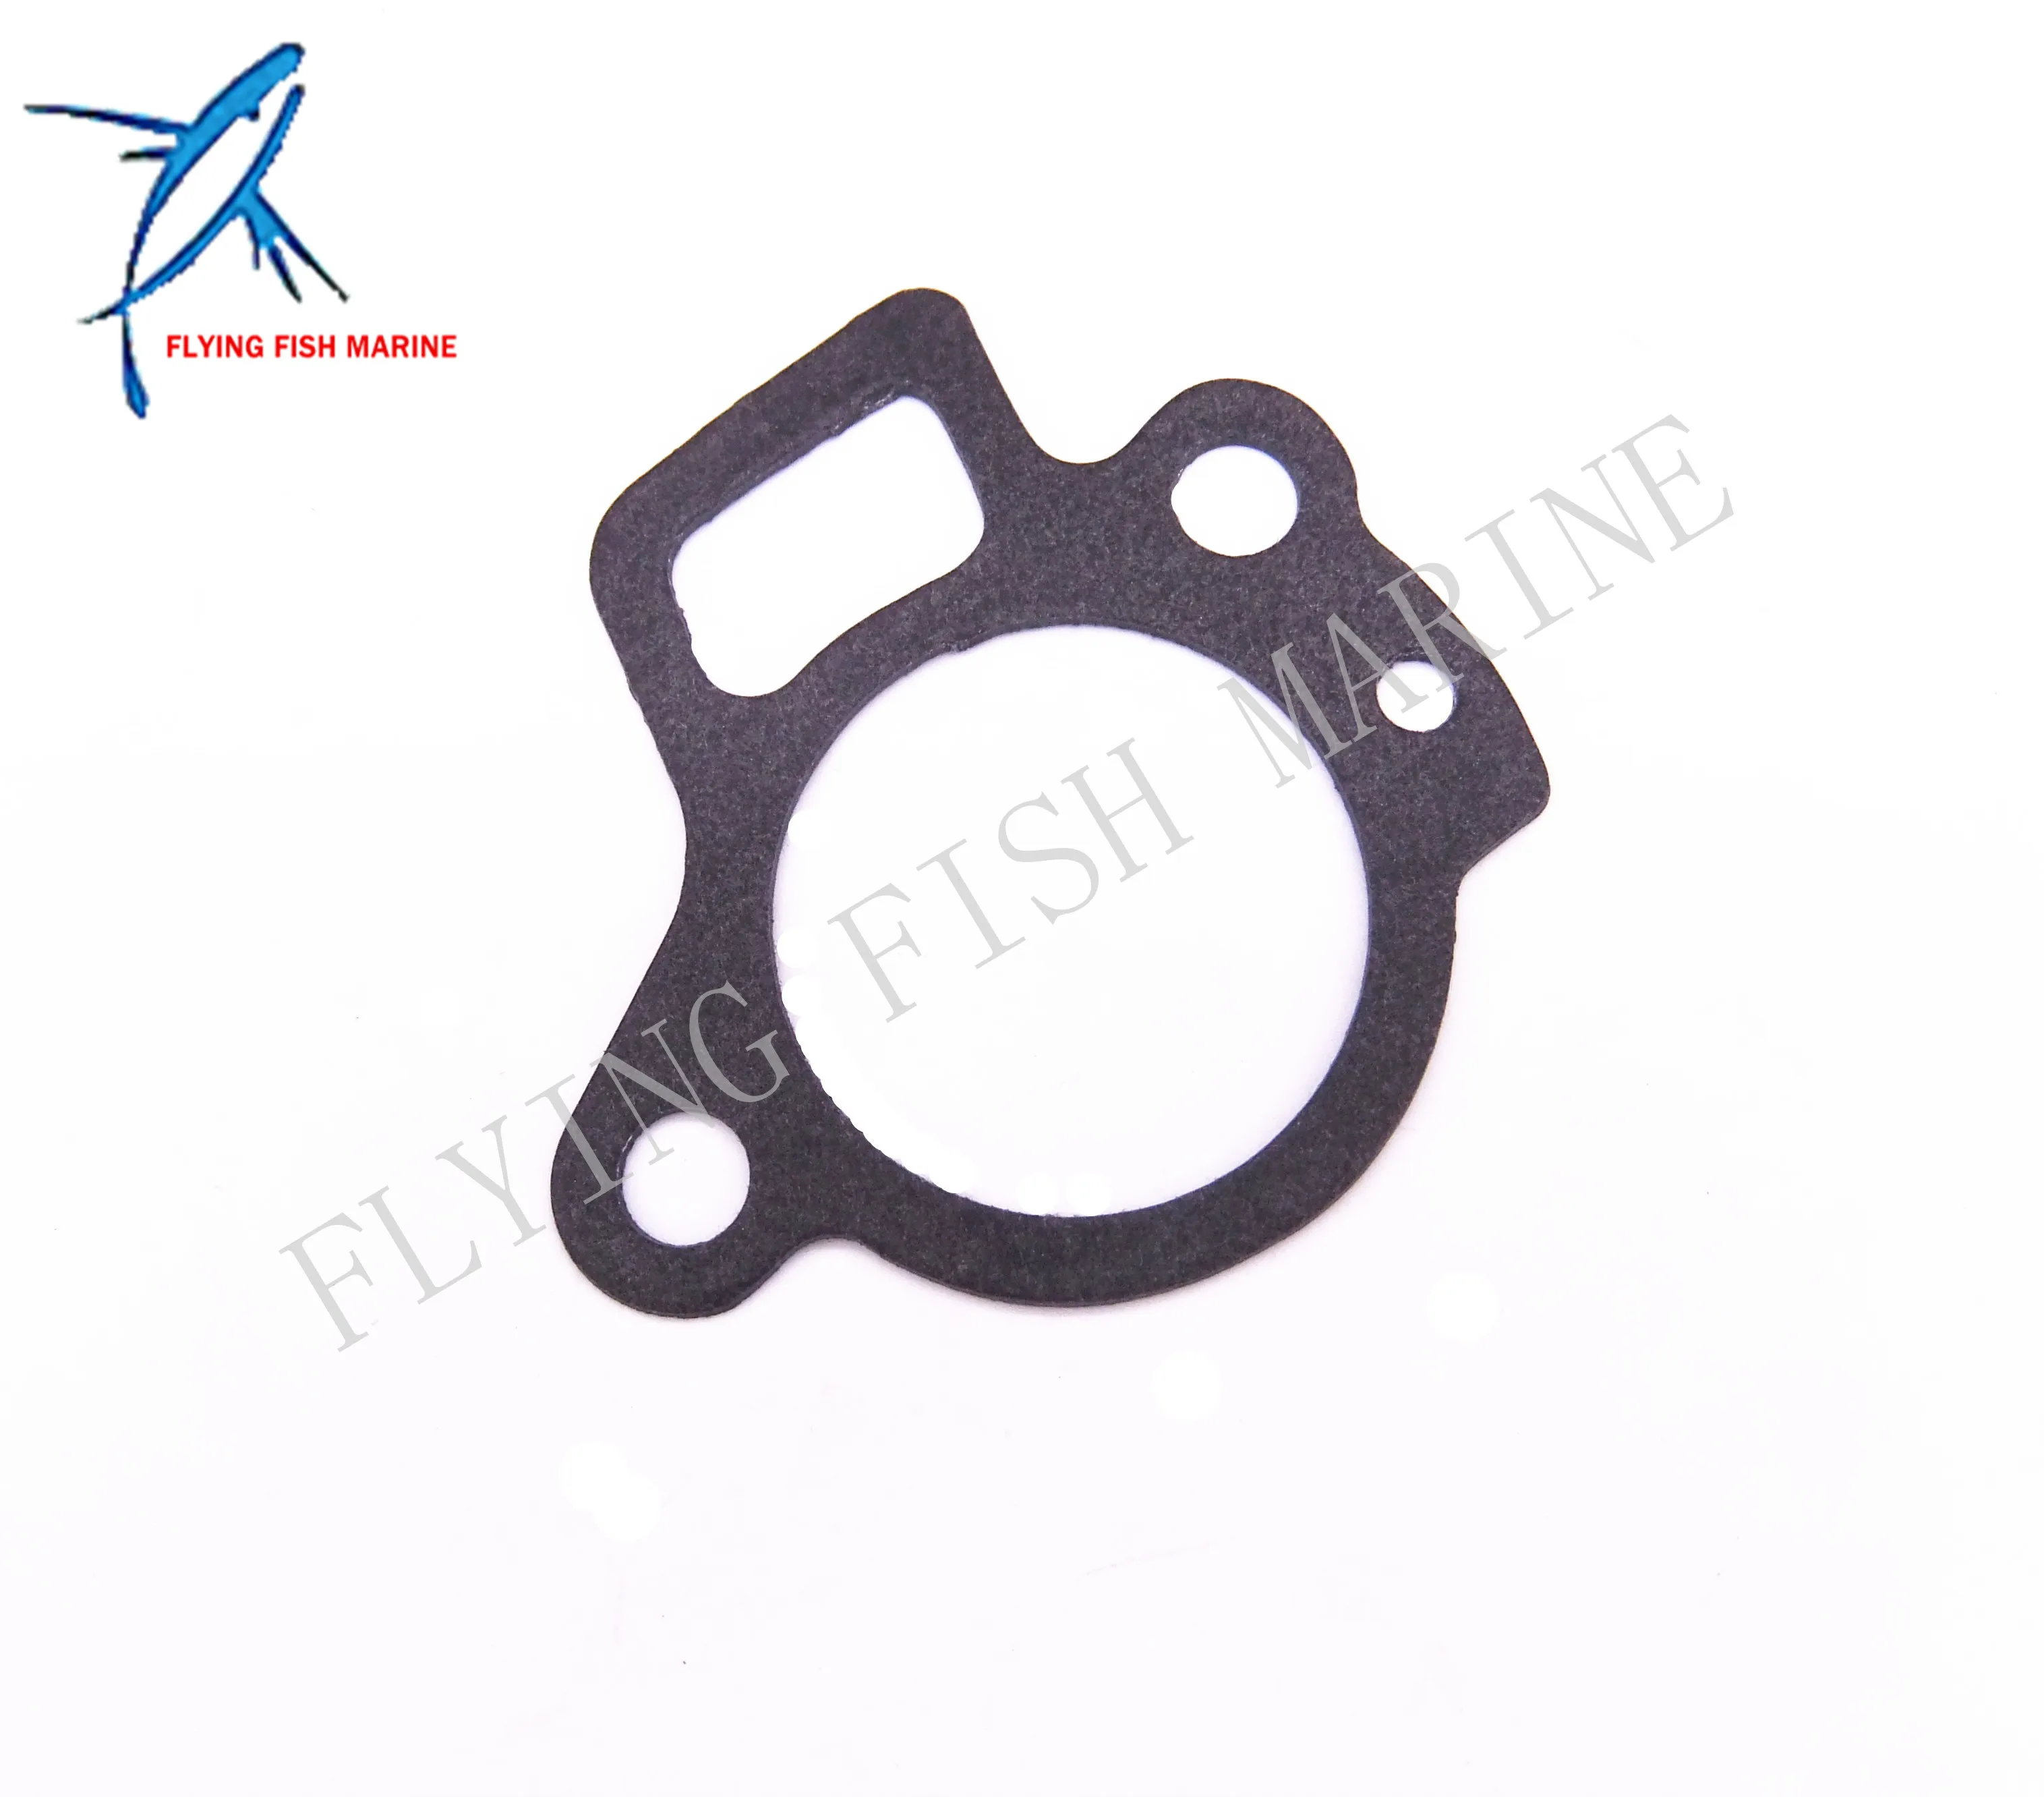 YAMAHA OEM Thermostat Cover Gasket 63P-12414-00-00 F150 Replacement Part